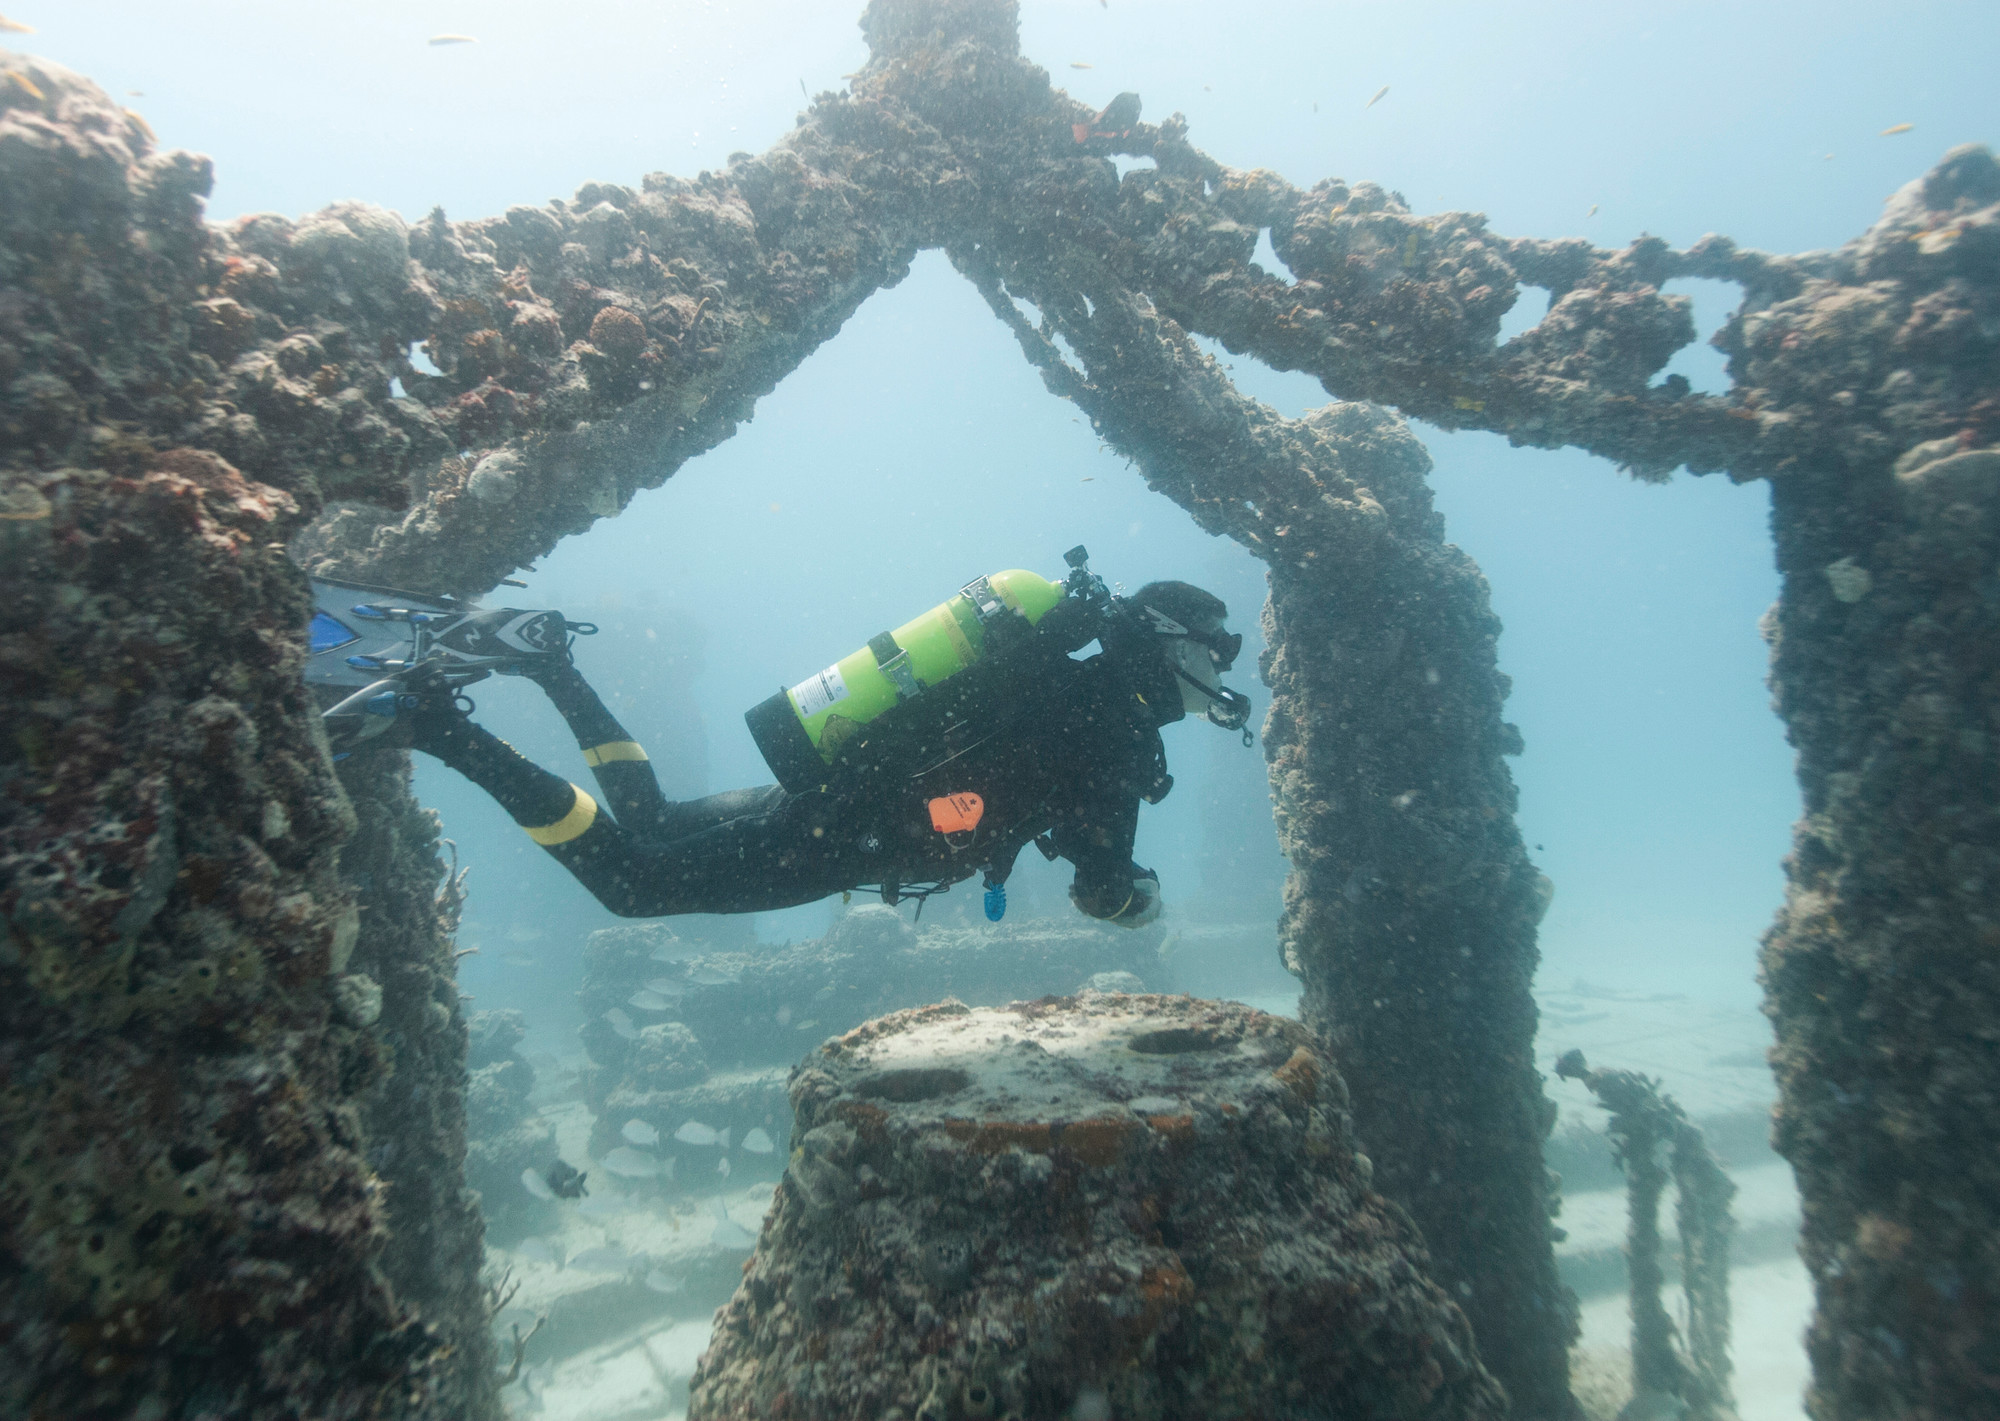 PHOTOS BY THE ASSOCIATED PRESS Ray Lowenstein with Neptune Memorial Reef gives a tour of the site near Miami Beach, Florida. The Neptune Memorial Reef, an underwater cemetery modeled after the lost city of Atlantis, is undergoing a massive expansion. The concrete structures provide a base for coral to get a head start and offer a high pH level, enabling sea creatures to flourish.